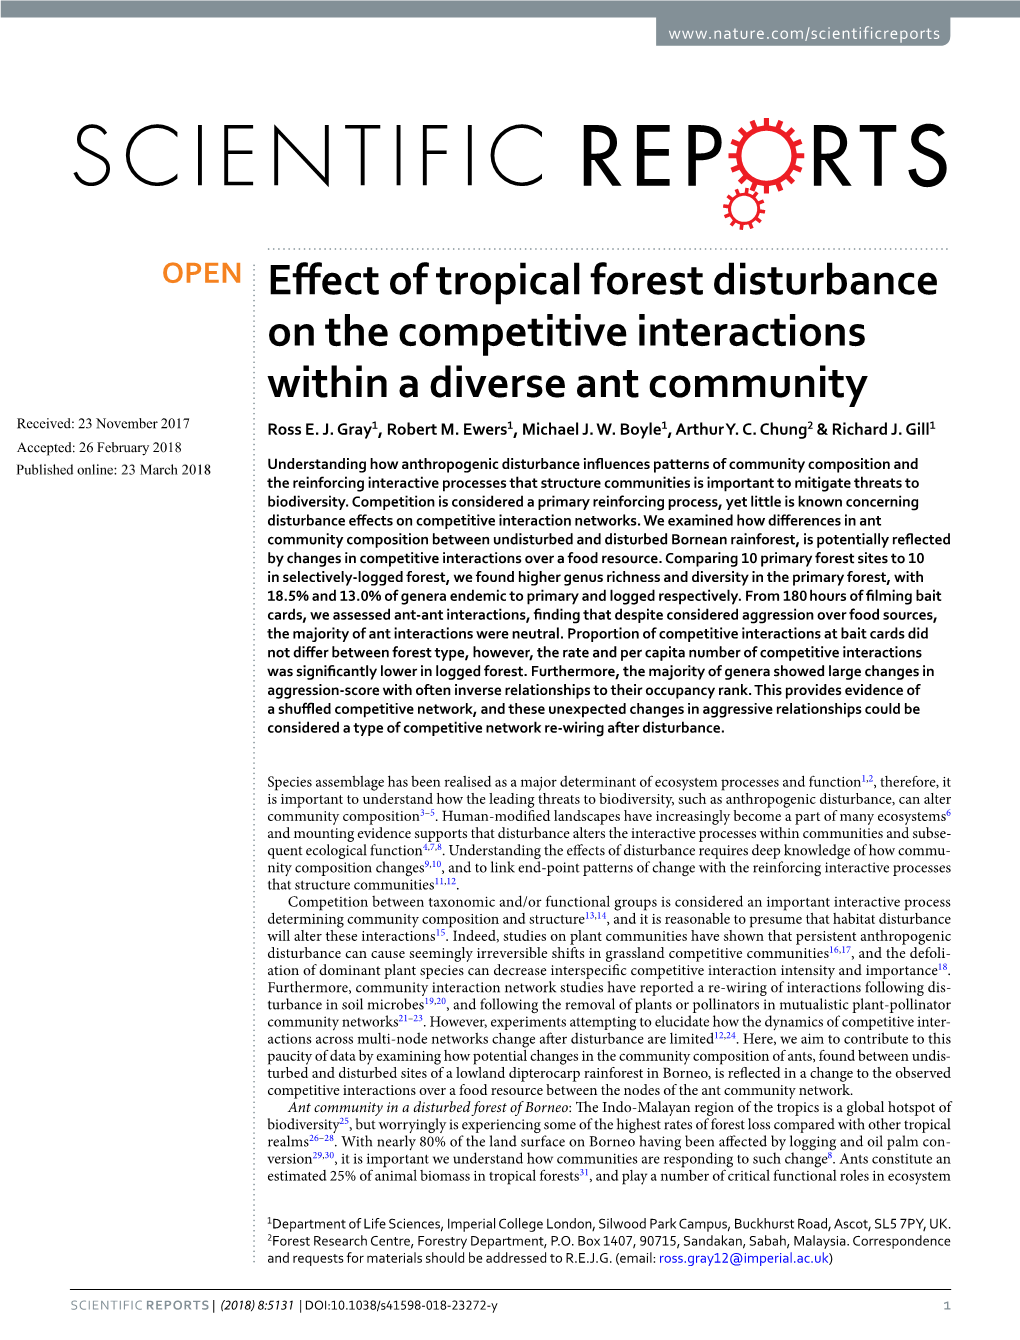 Effect of Tropical Forest Disturbance on the Competitive Interactions Within A